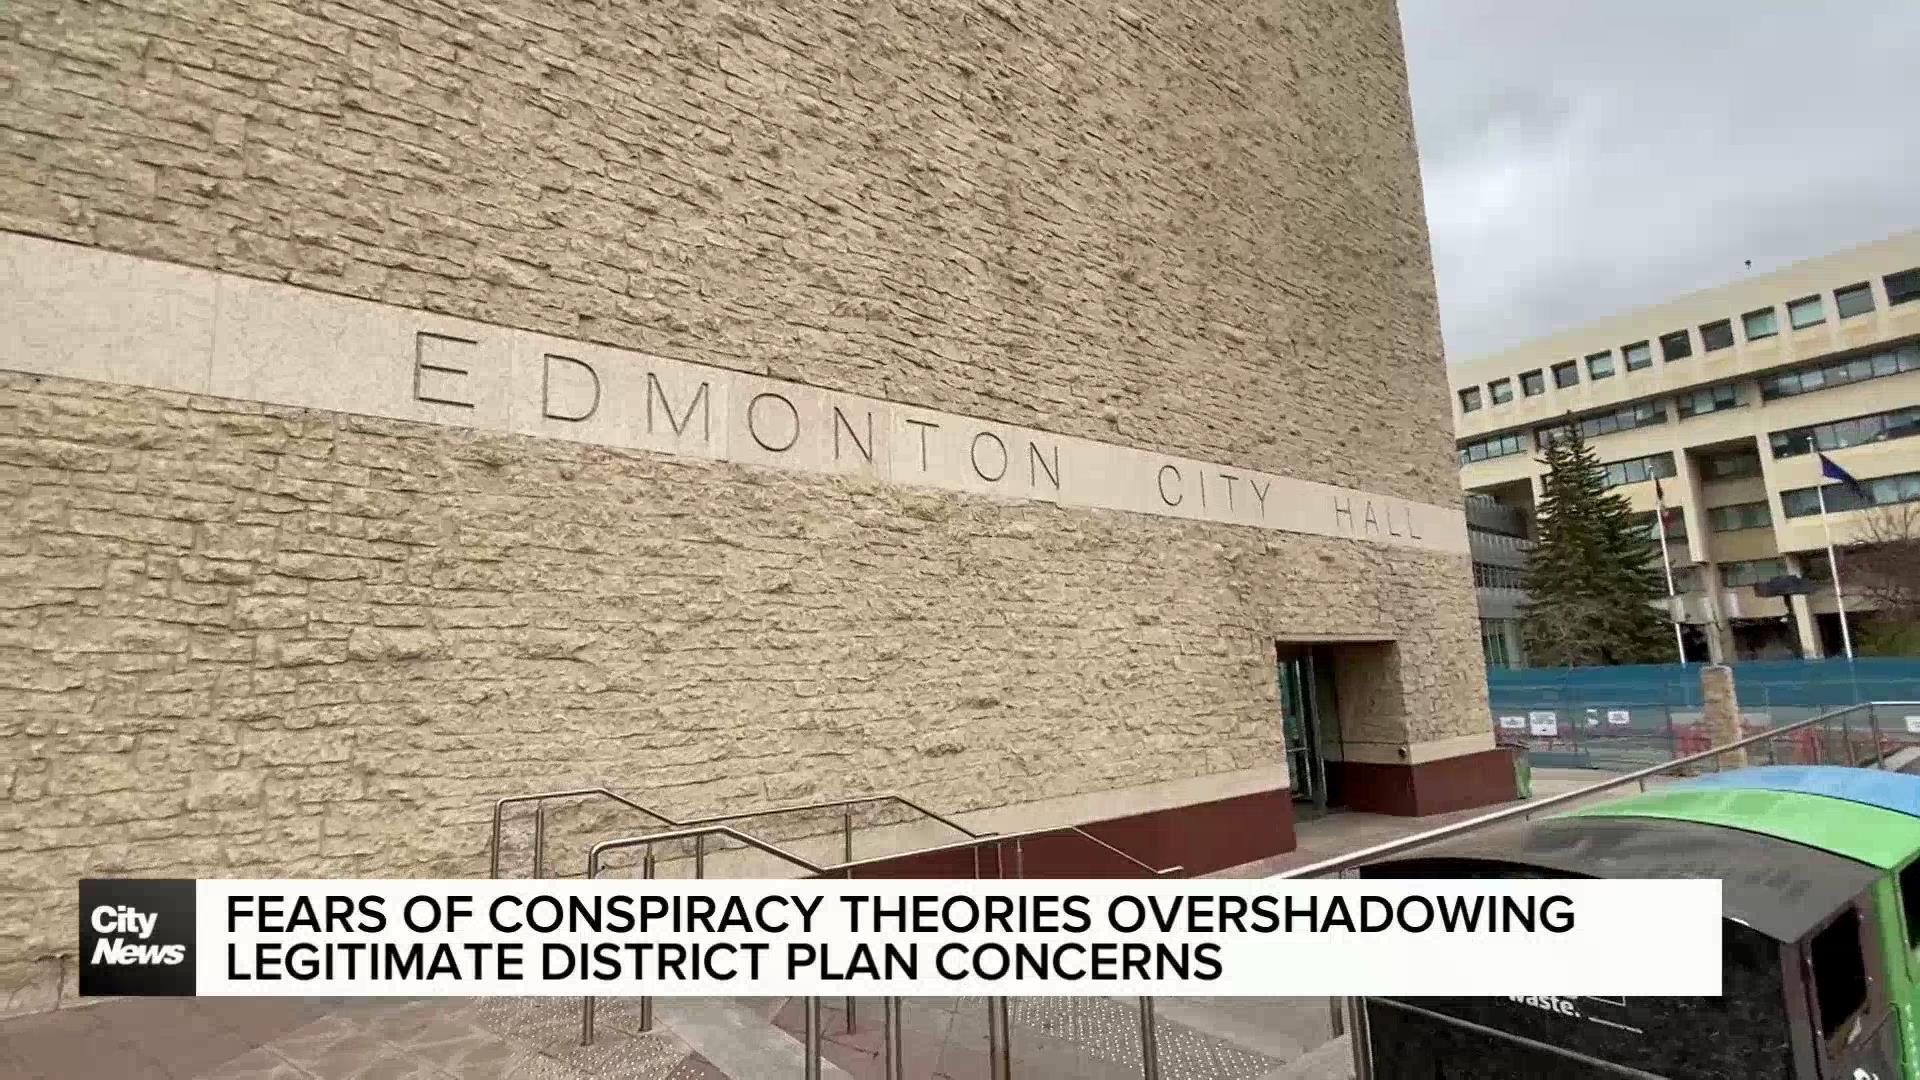 Fears that conspiracy theories are overshadowing legitimate district plan concerns